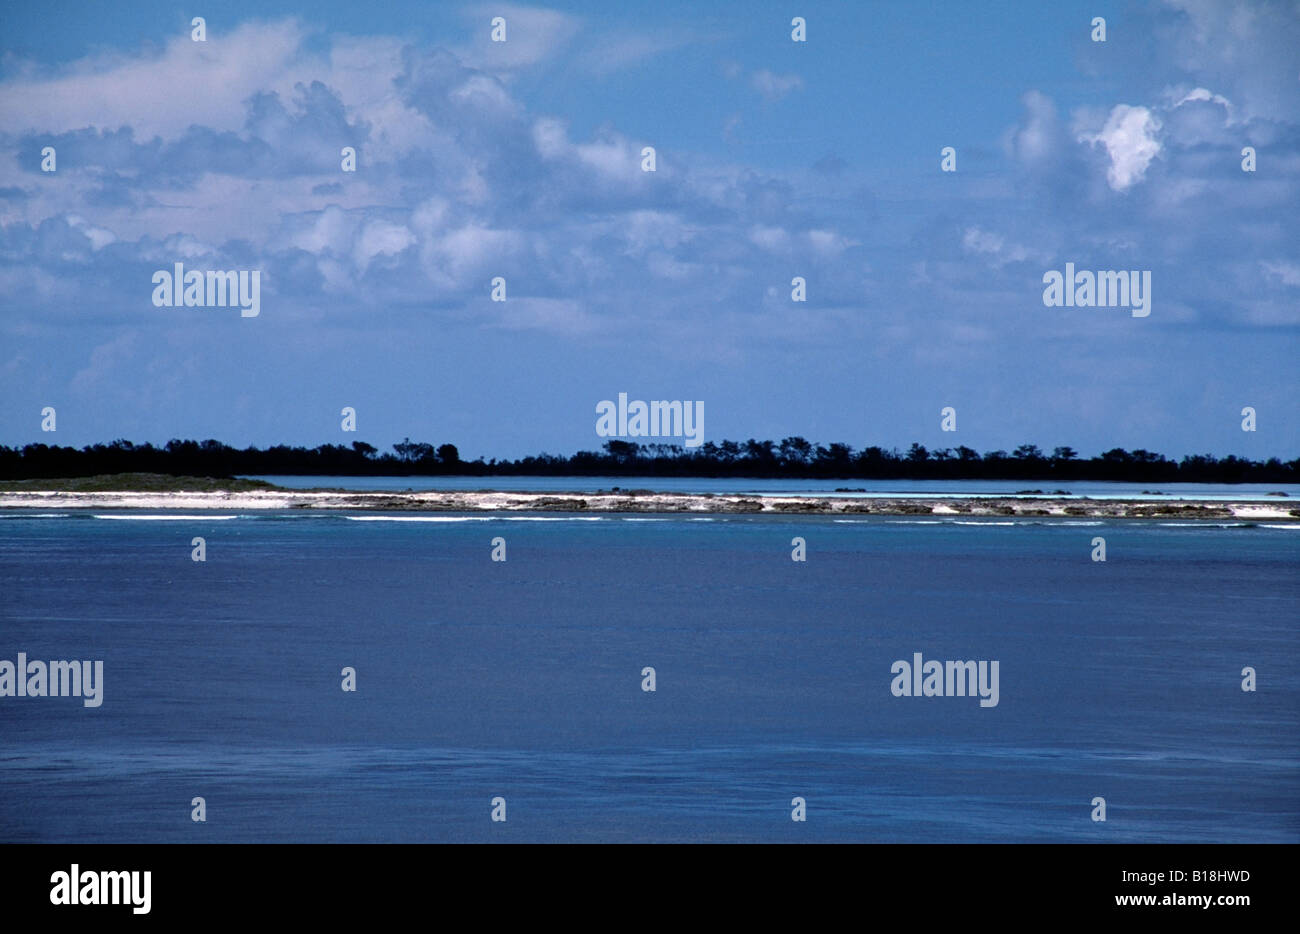 Remote Cosmoledo group of atolls in the Aldabra group, Seychelles, Indian Ocean Stock Photo